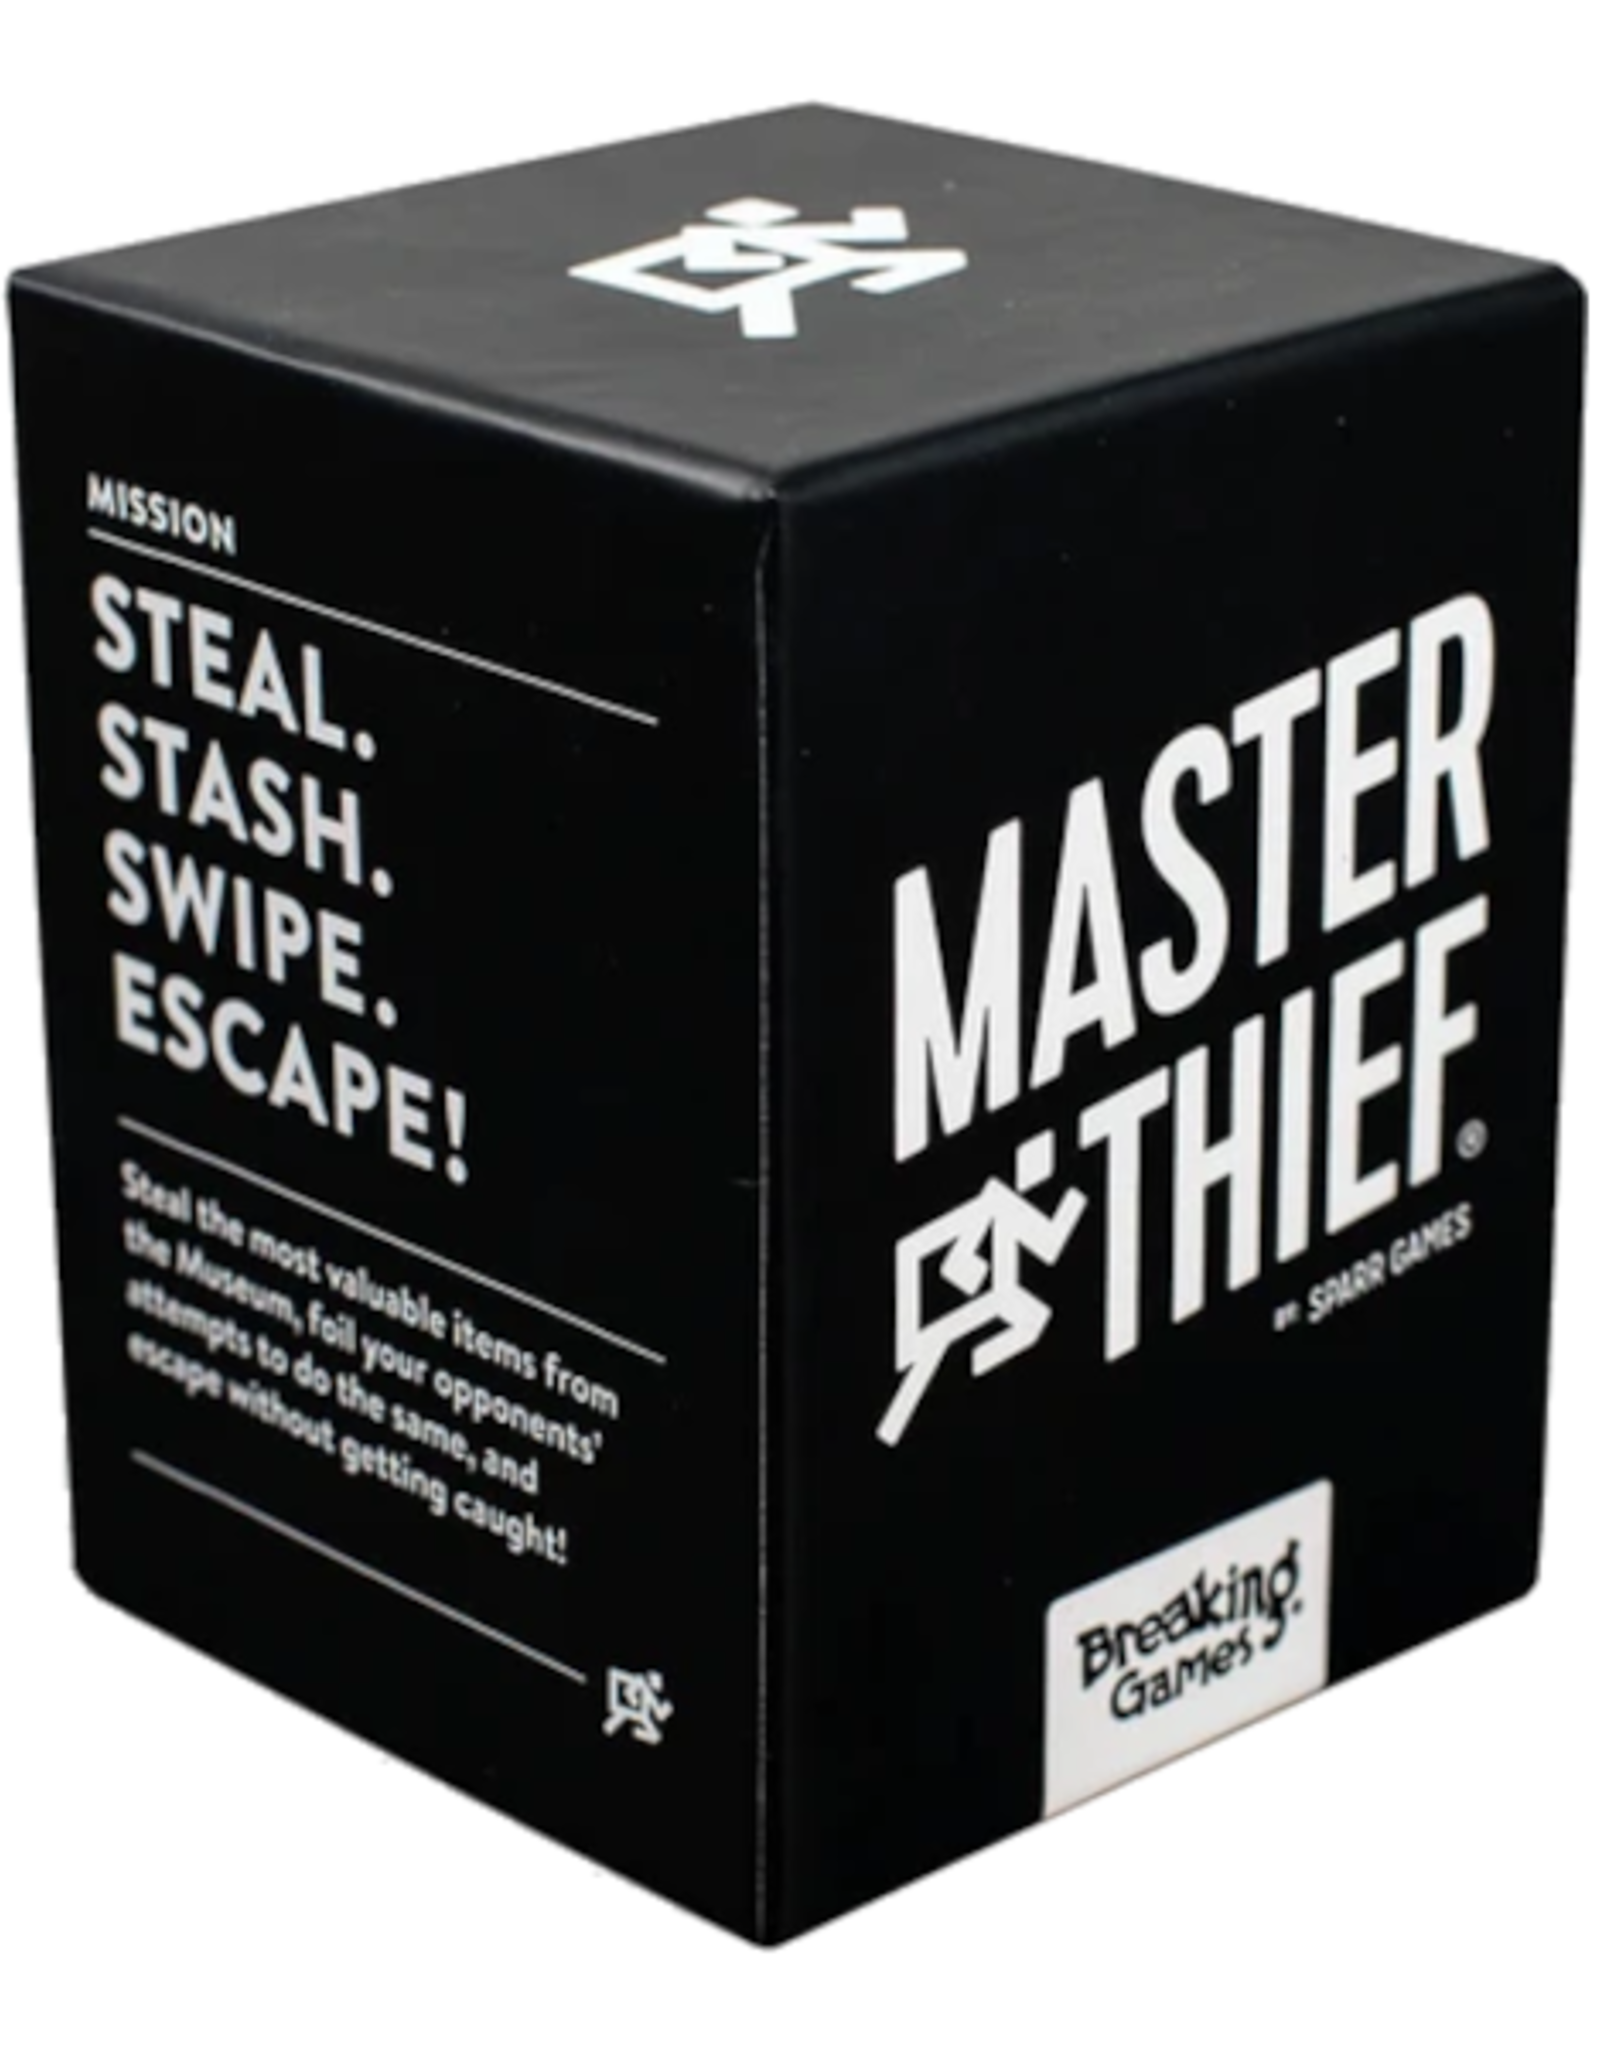 Breaking Games - Master Thief